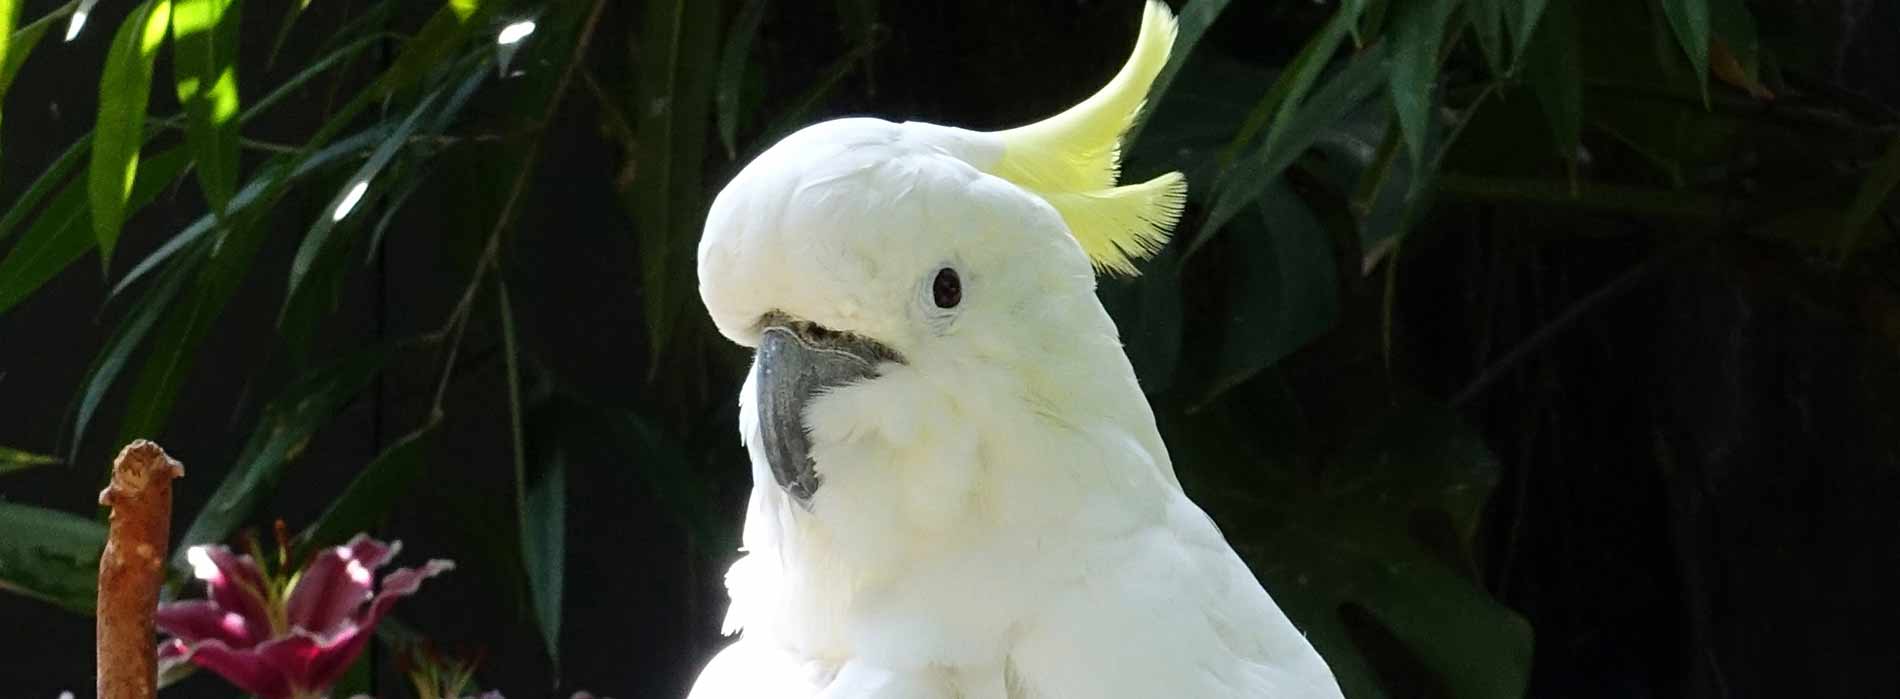 Greater sulphur crested cockatoo